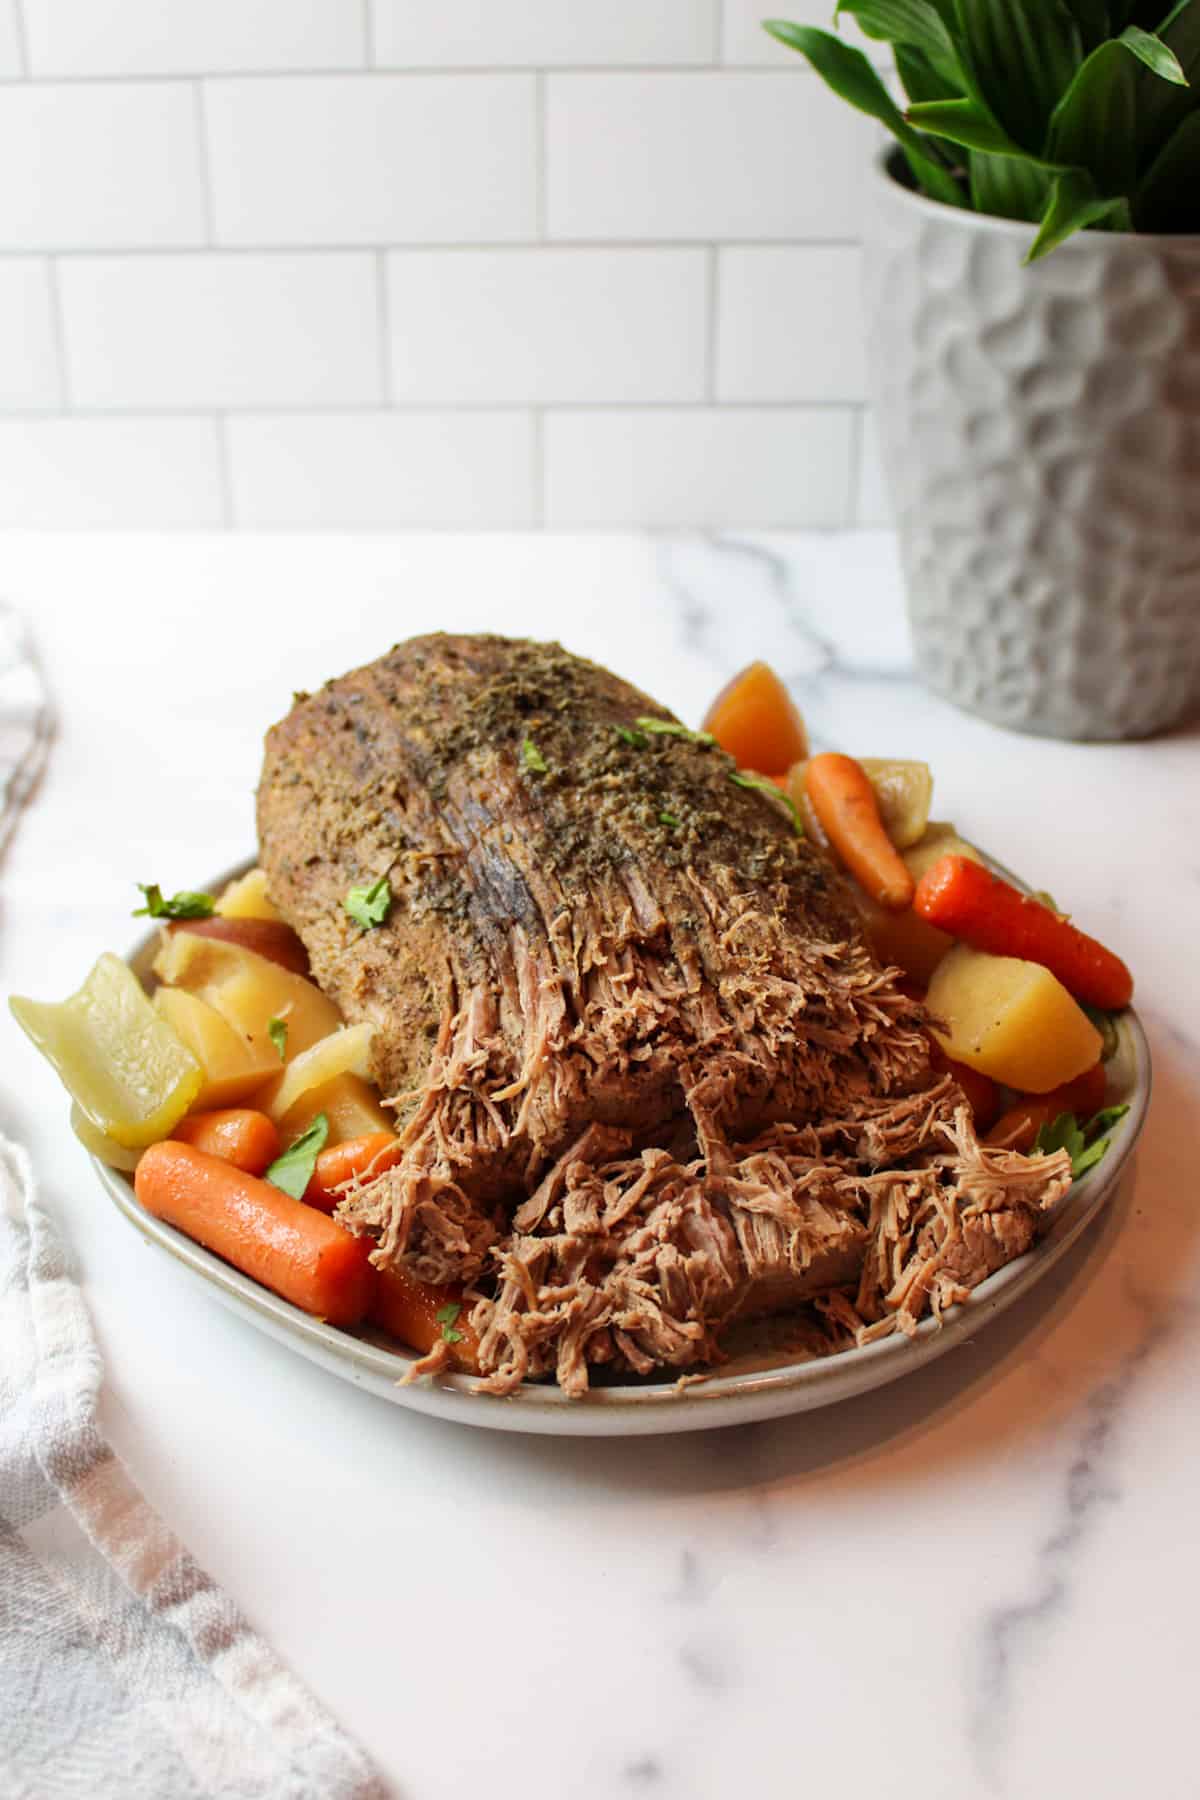 a plate of shredded beef roast and veggies